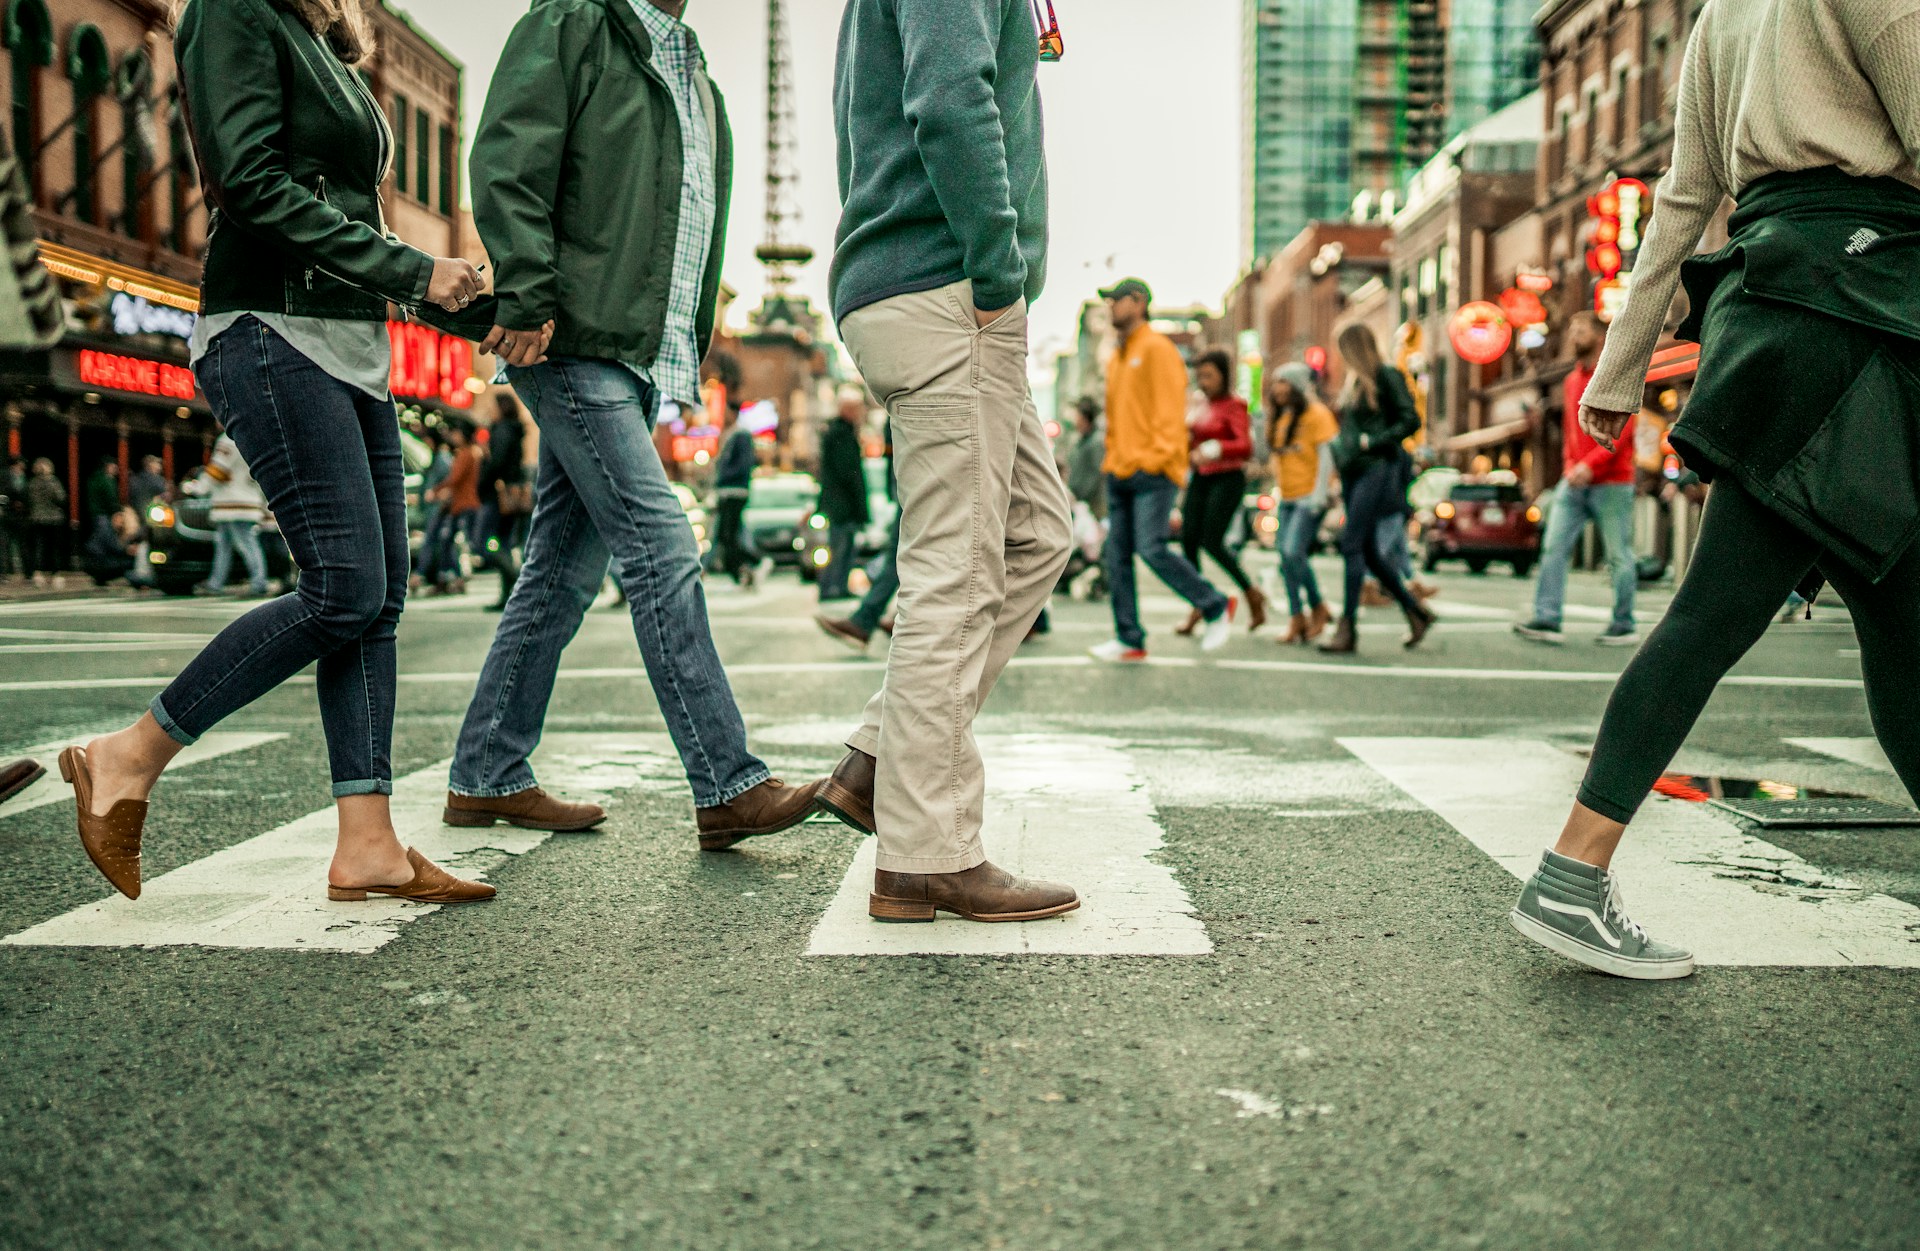 5 Common Causes of Pedestrian Accidents